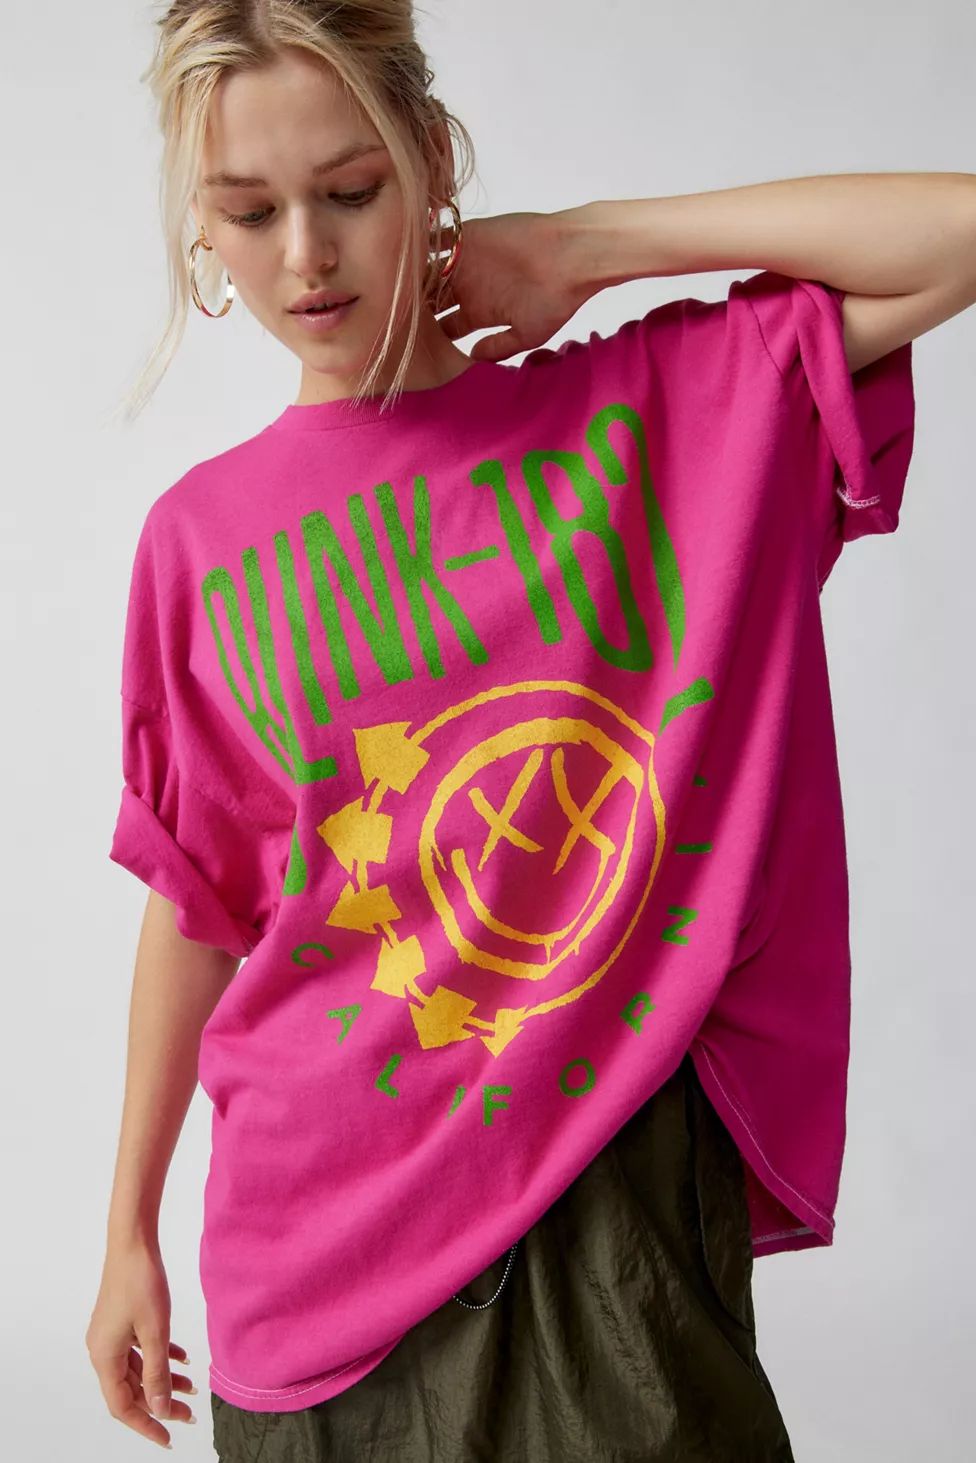 Blink 182 T-Shirt Dress | Urban Outfitters (US and RoW)